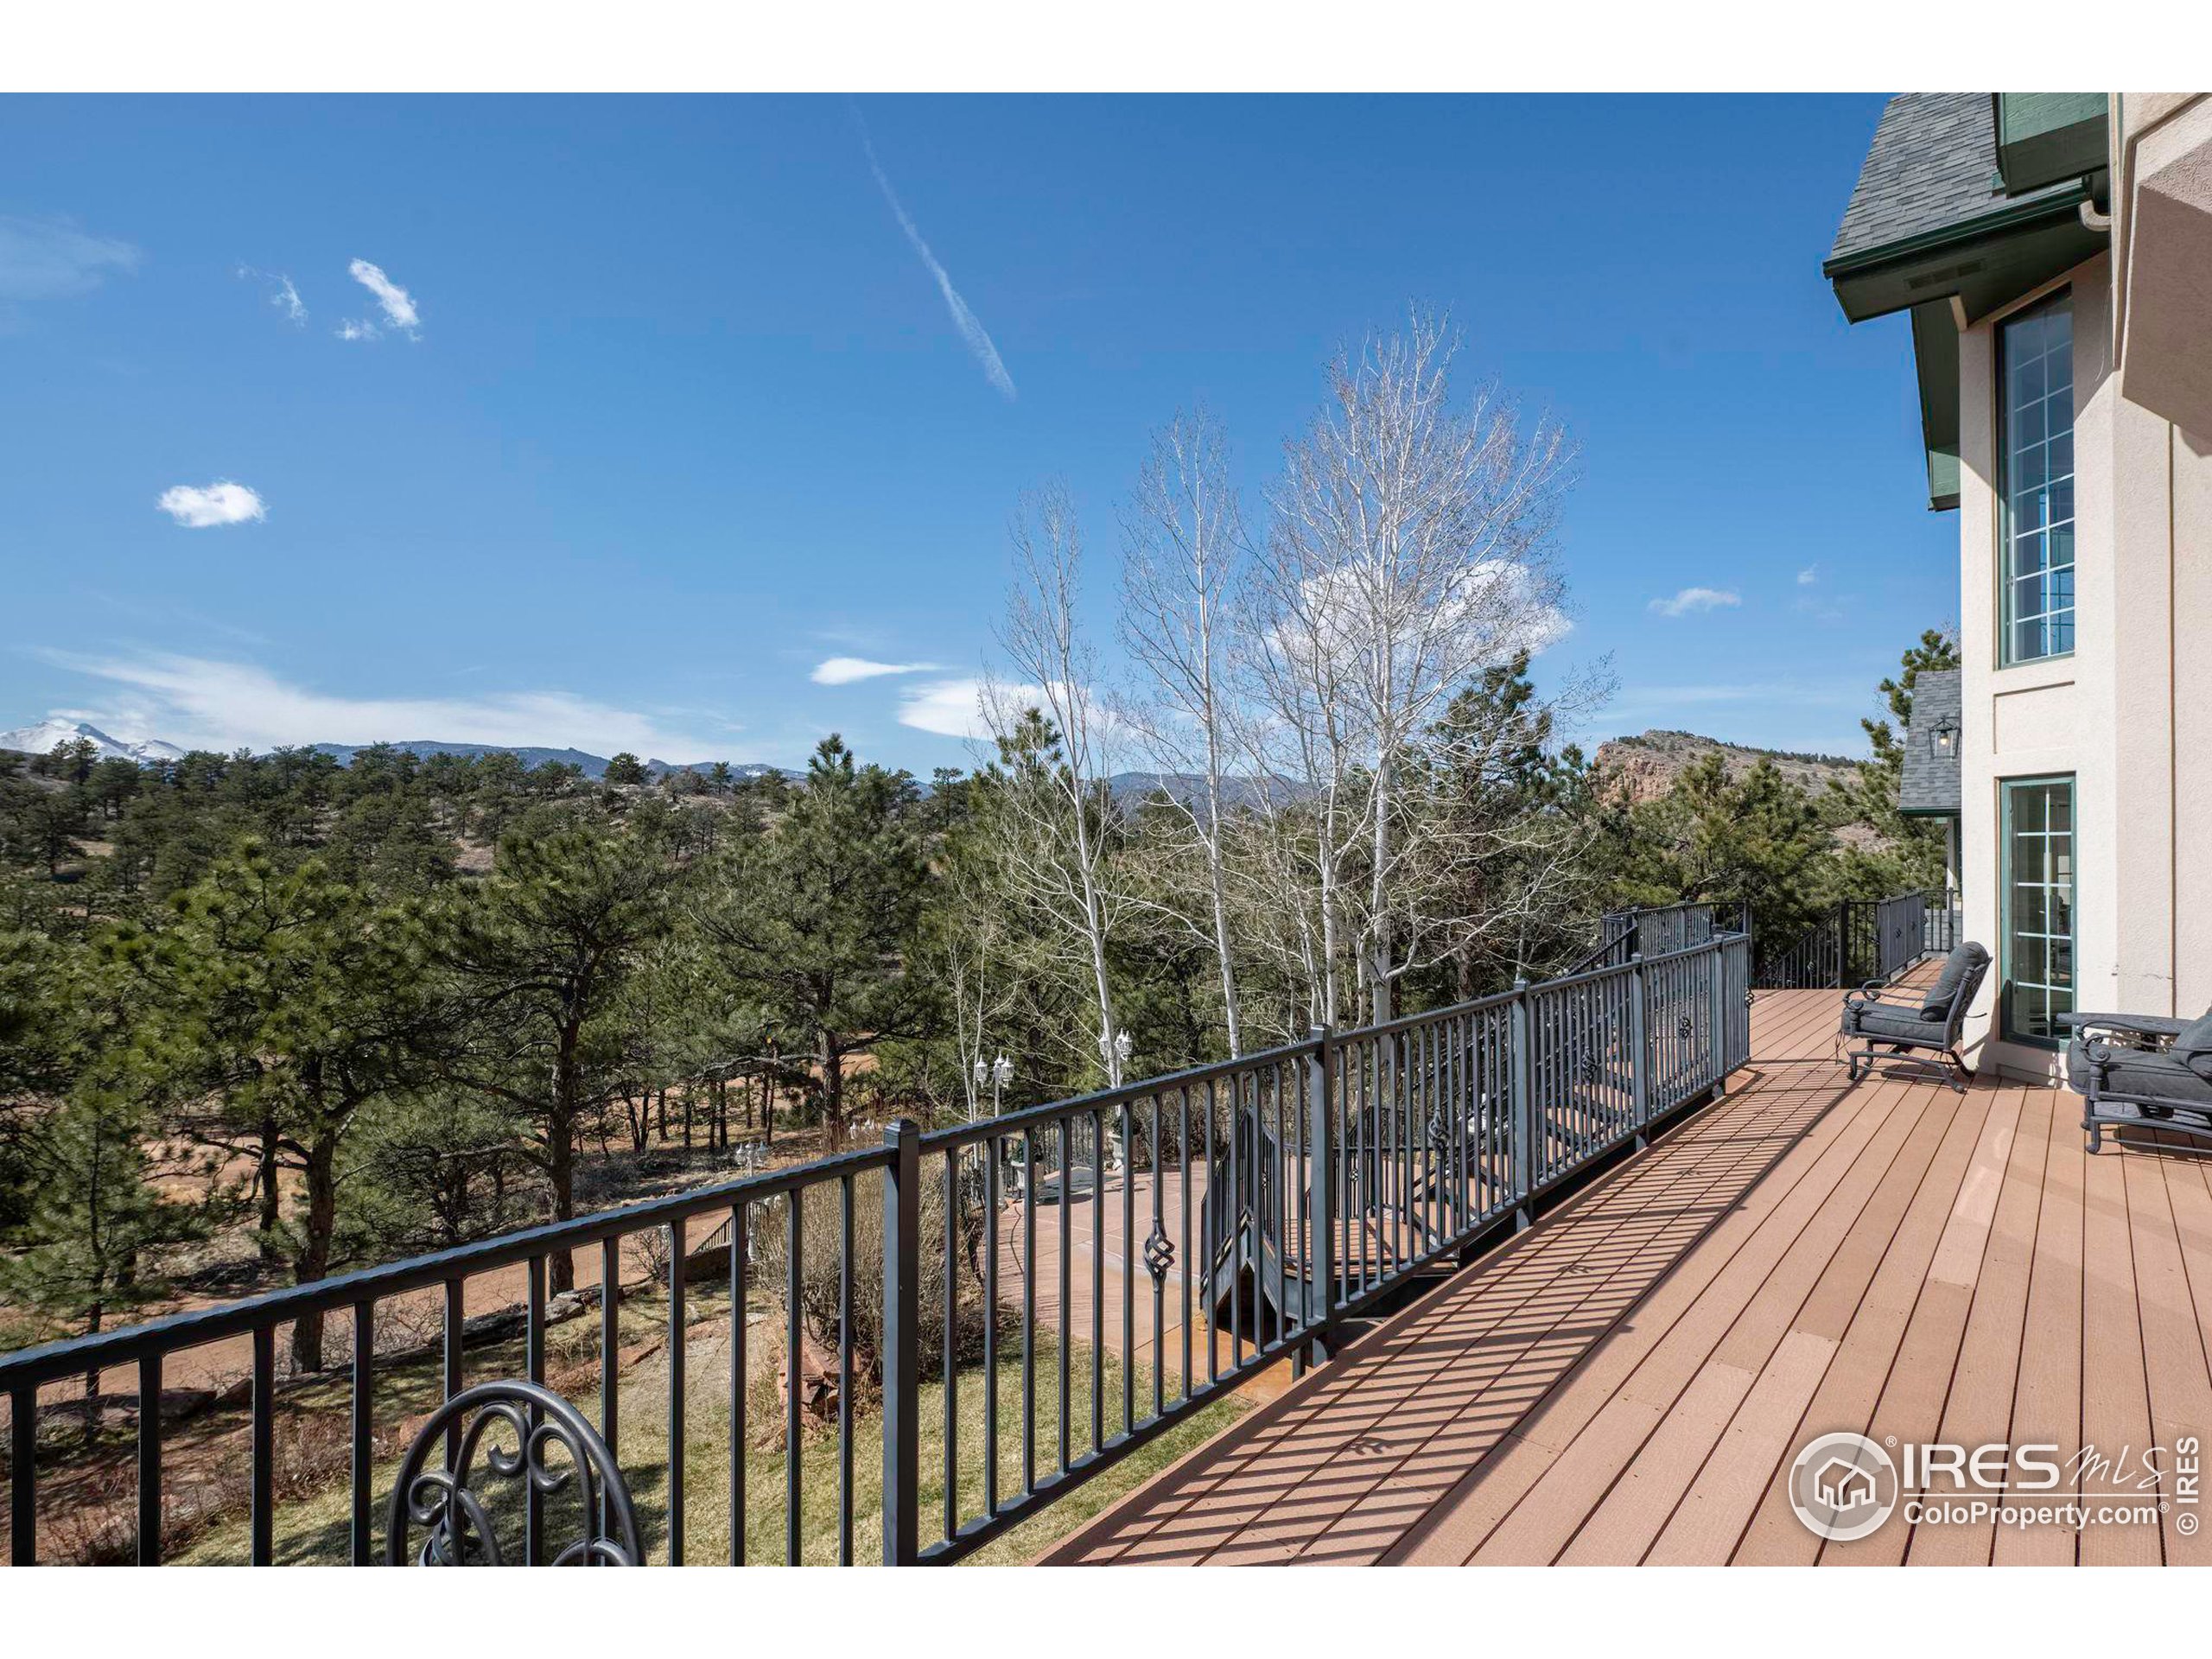 603 Indian Lookout Rd

                                                                             Lyons                                

                                    , CO - $7,950,000